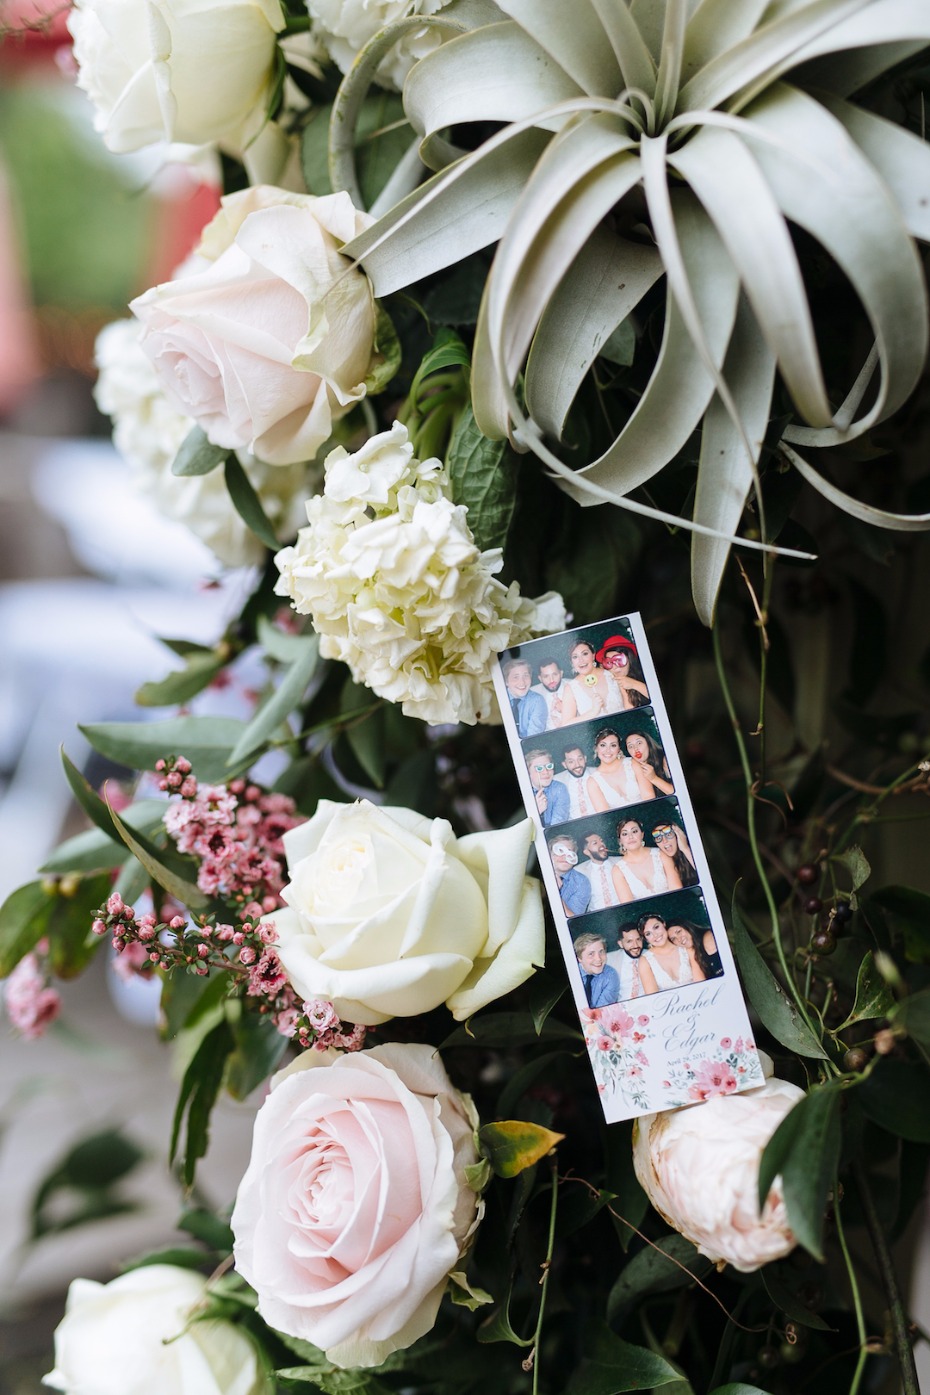 Favor idea! Have a photo booth at your wedding